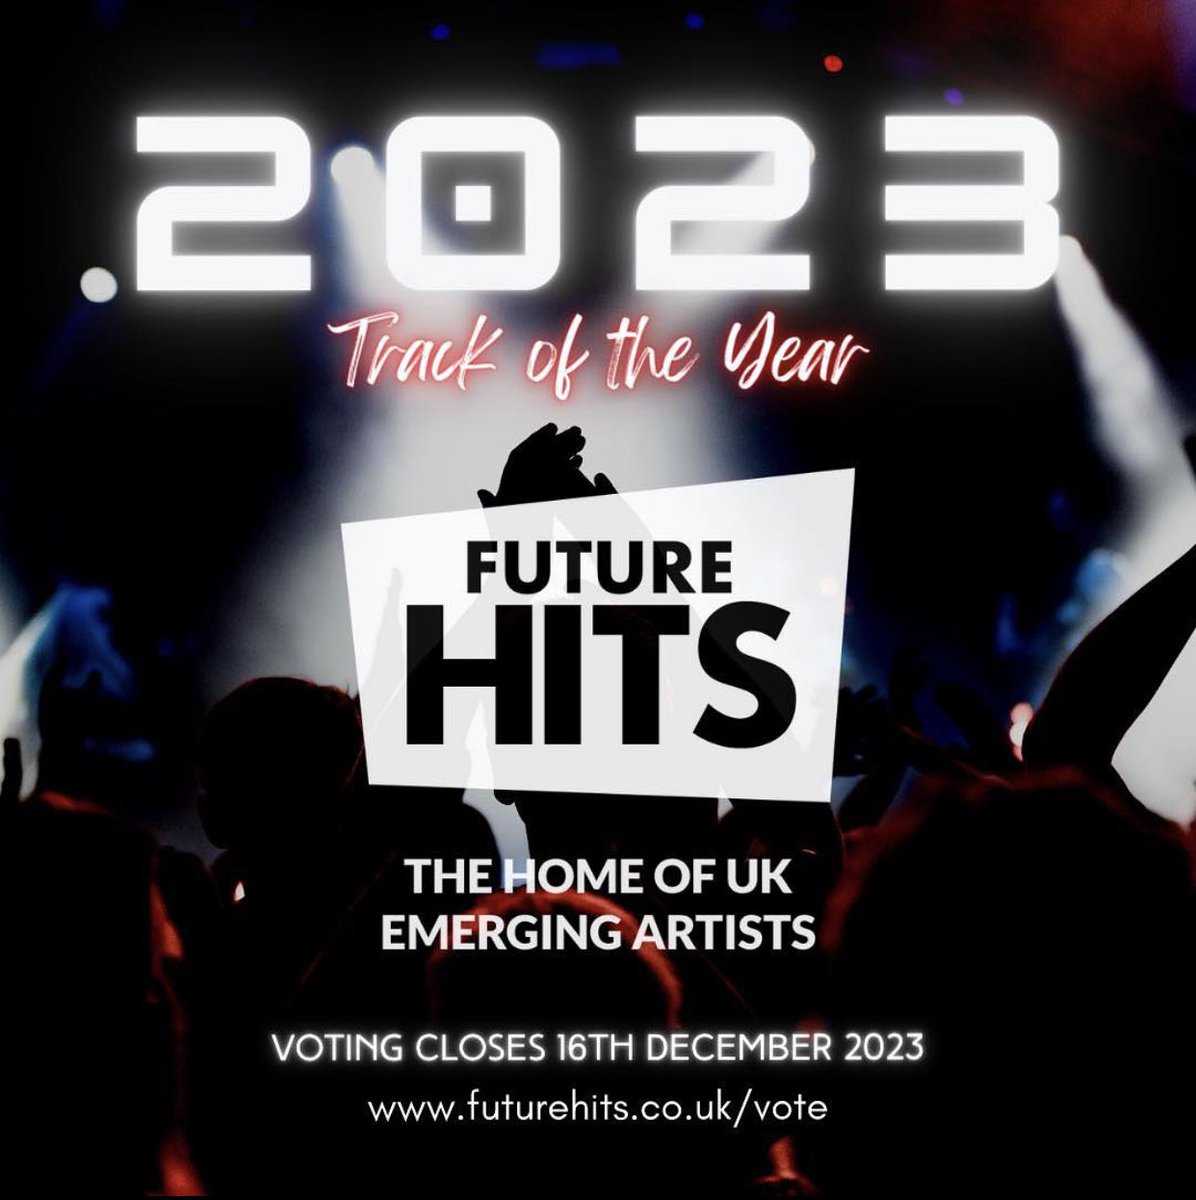 Fever Dream has been nominated for @FutureHitsRadio track of the year and the voting closes in just a few hours at 11pm !!! VOTE HERE - futurehits.co.uk